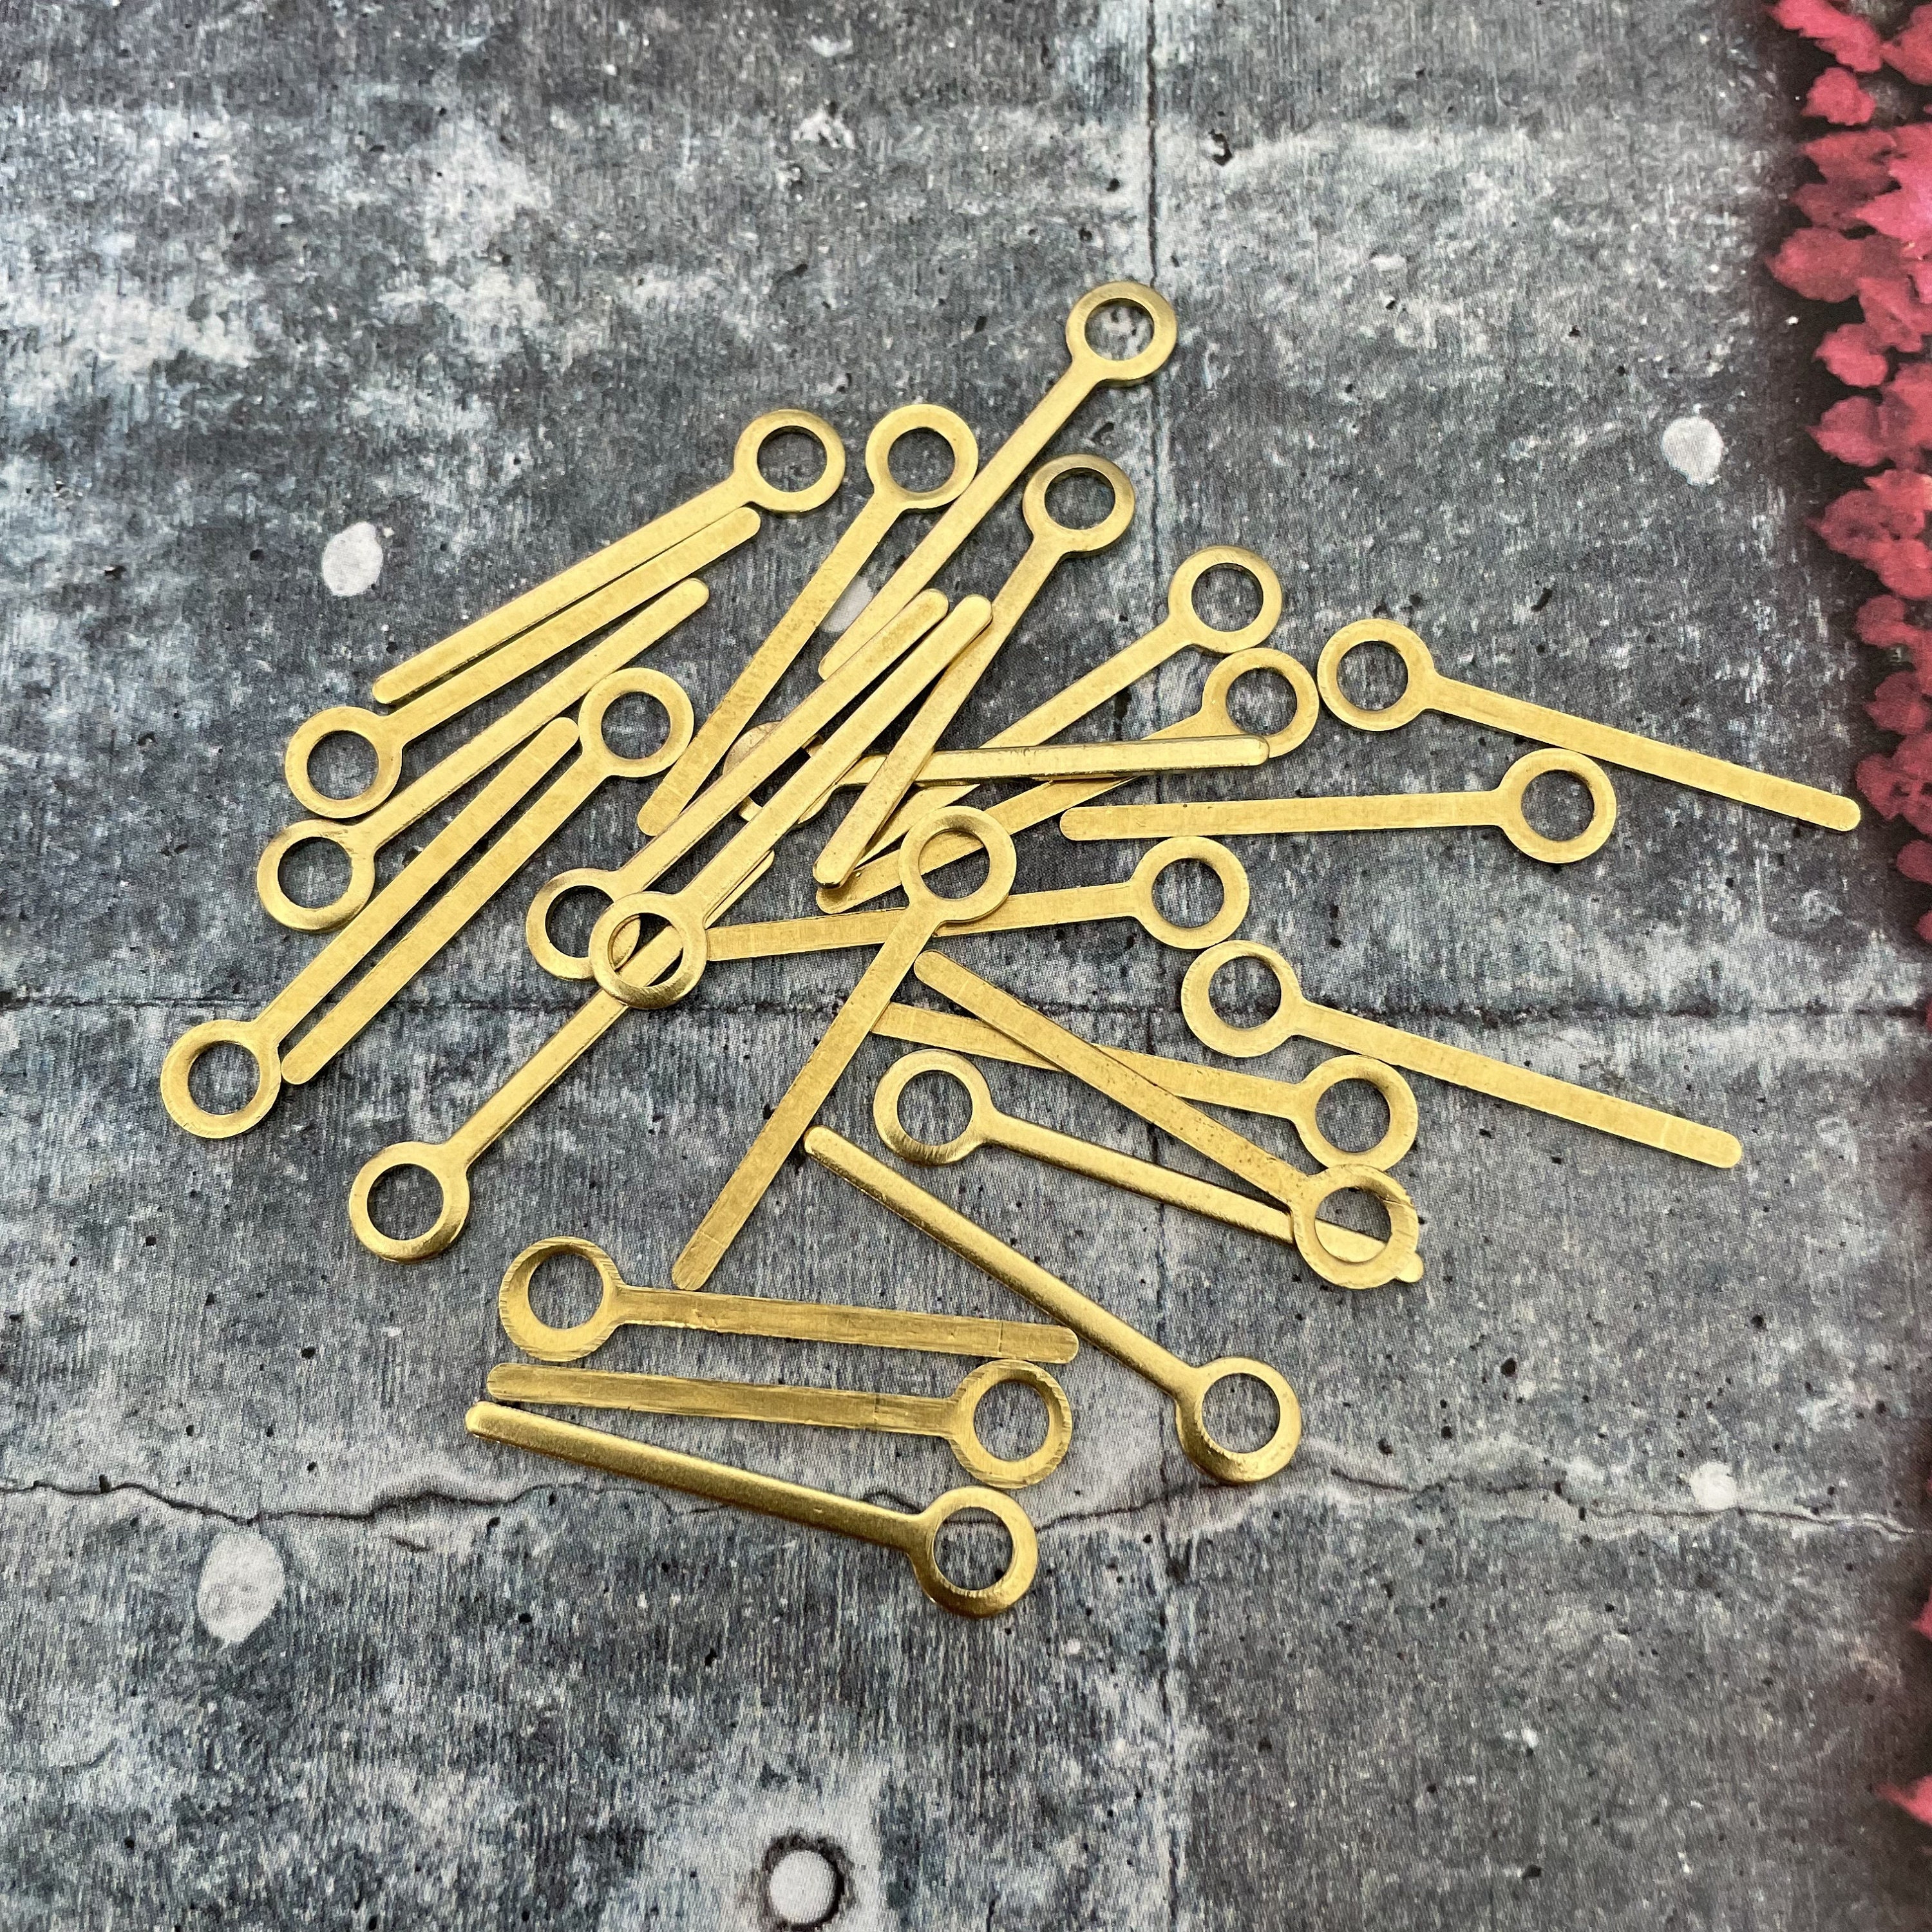 Raw Brass Earring Findings 88 PCS One Set, Endless Possibilities